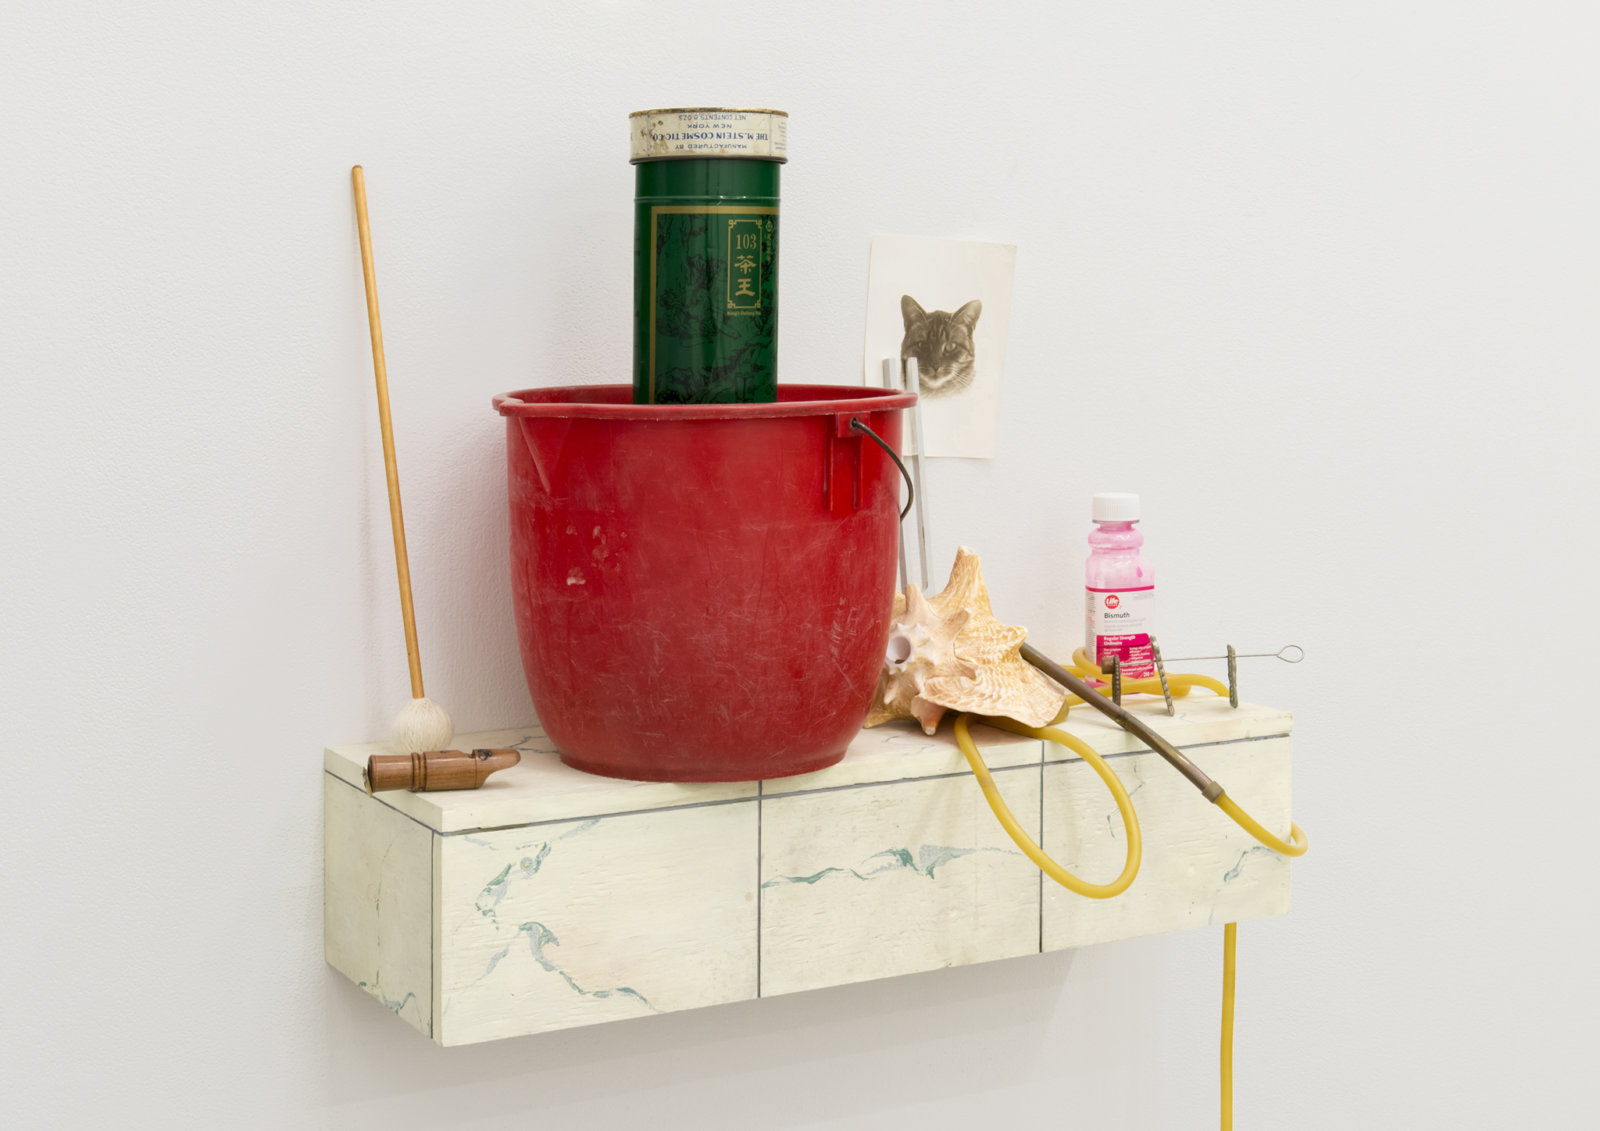 Ashes Withyman, Cetus, River, Furnas, Musca, Compass, Altar, Cup, 2017–2018, plastic bucket, tin, animal call parts, mallet, wood, medical tubing, conch, therapeutic tuning fork, cast: copper, brass &amp; silver crackers, bismuth, wood, brass, bird whistle, found photograph, painted plywood, 44 x 28 x 13 in. (112 x 71 x 33 cm)